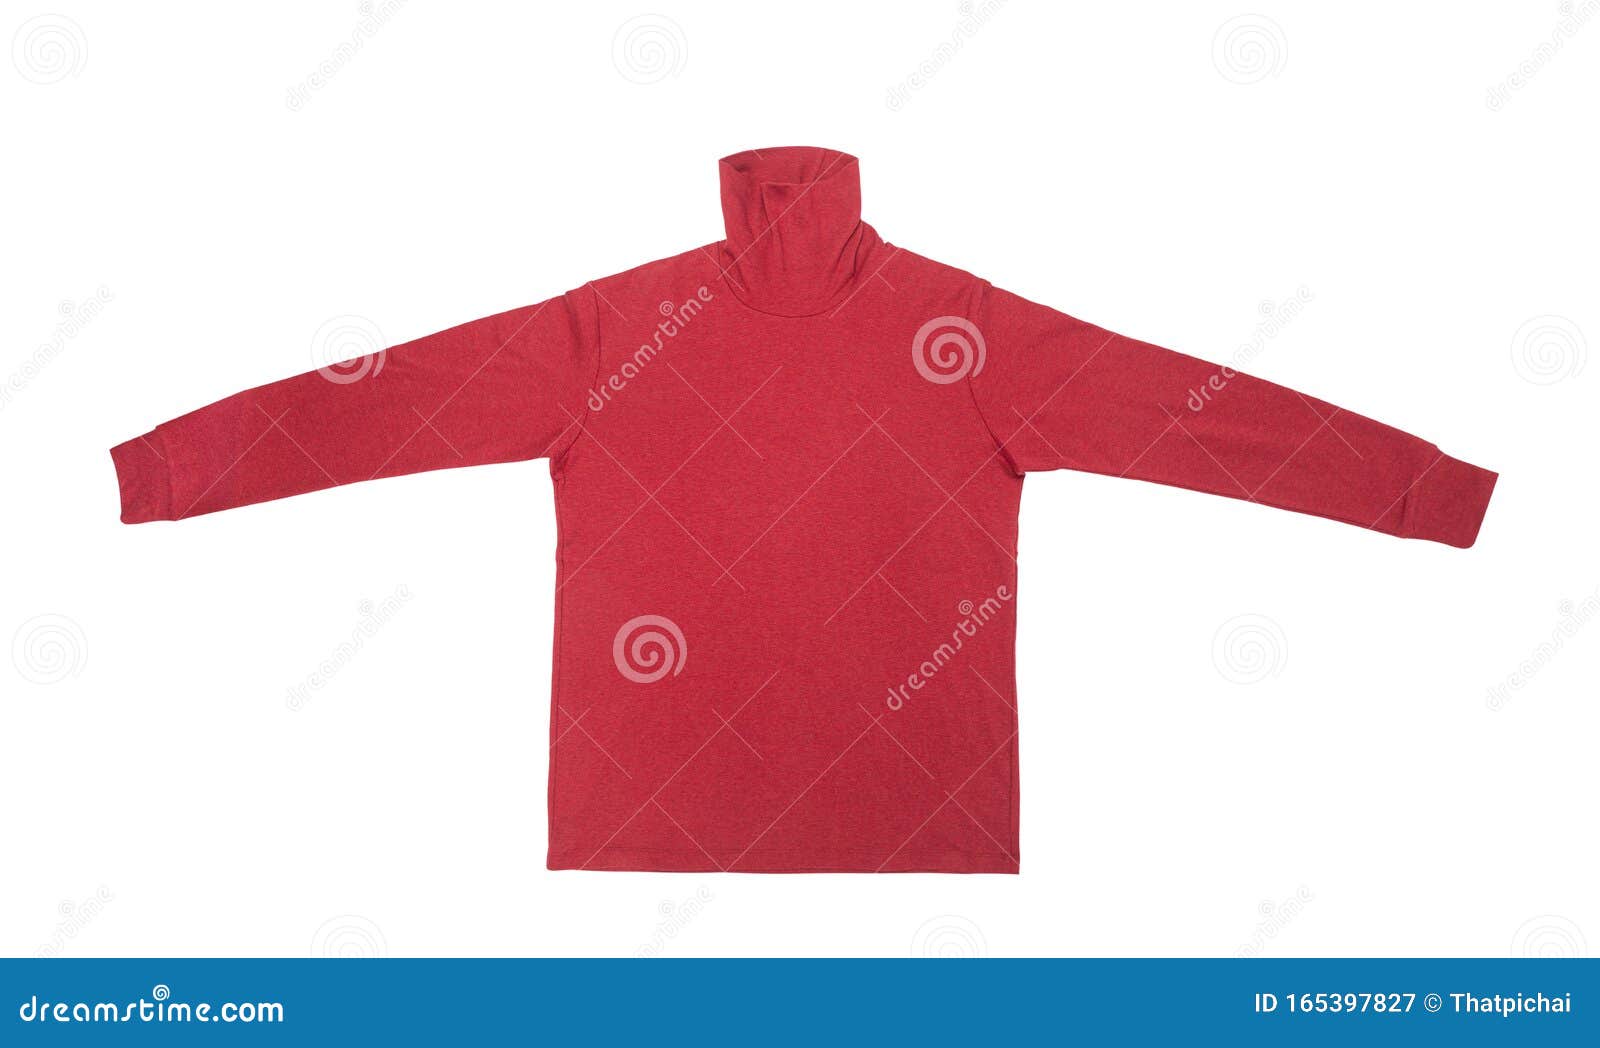 Download Blank Red Long Sleeve T Shirt Turtle Neck Mock Up Template ...